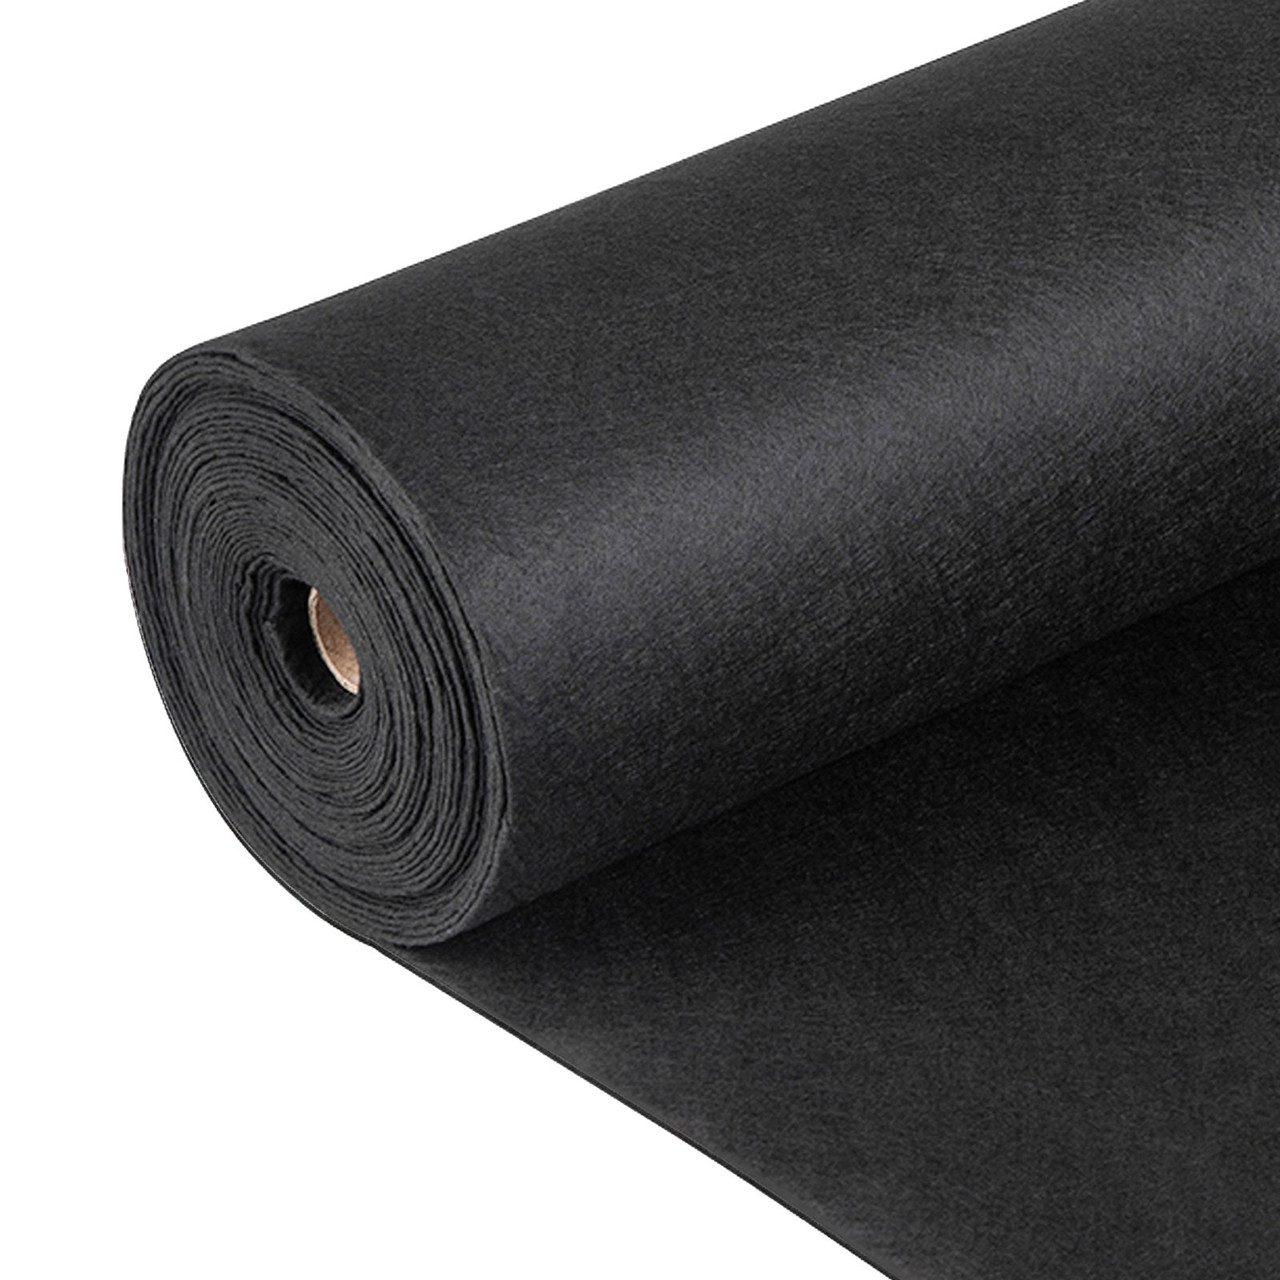 Garden Weed Barrier Fabric, 8OZ Heavy Duty Geotextile Landscape Fabric, 6ft x 100ft Non-Woven Weed Block Gardening Mat for Ground Cover, Weed Control